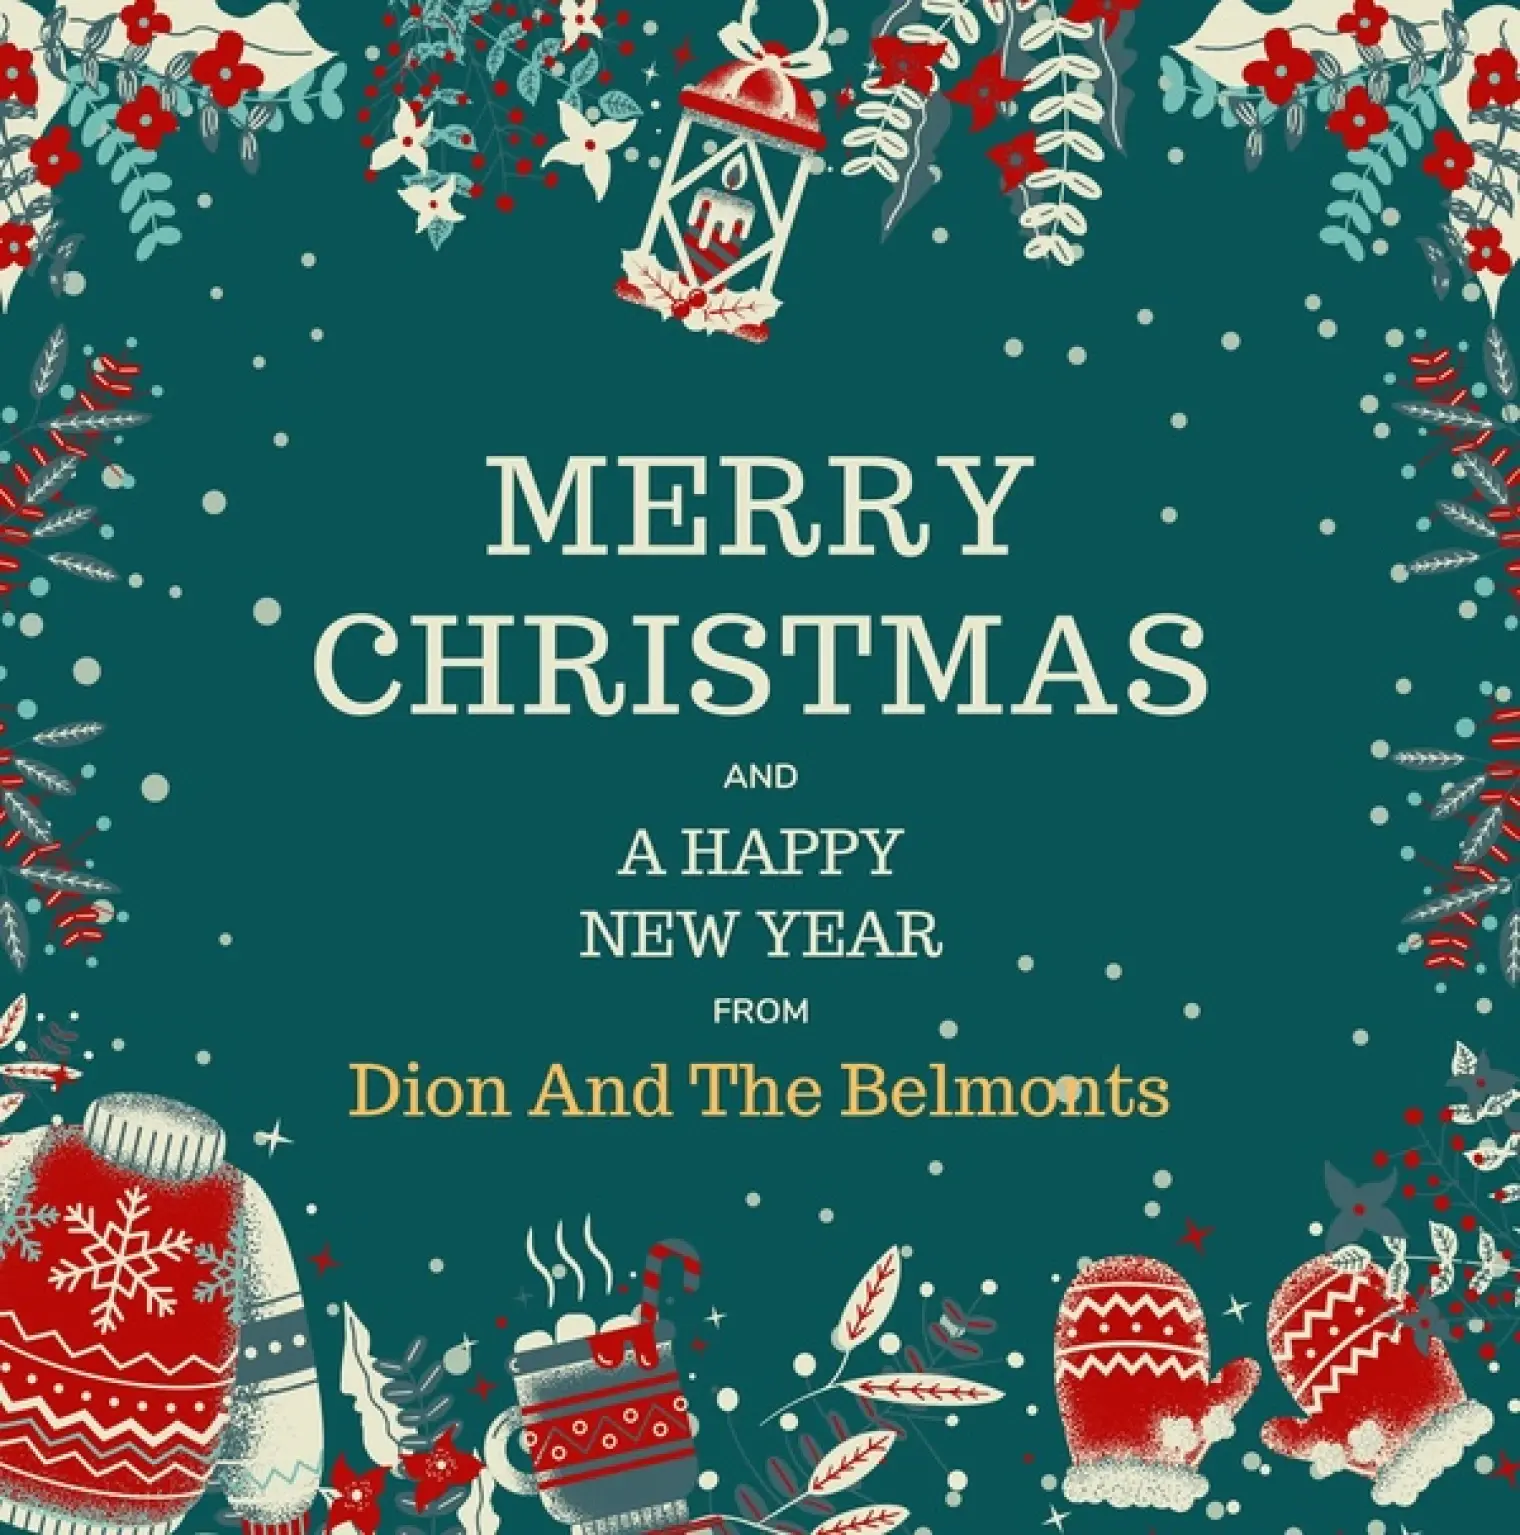 Merry Christmas and A Happy New Year from Dion And The Belmonts -  Dion & The Belmonts 